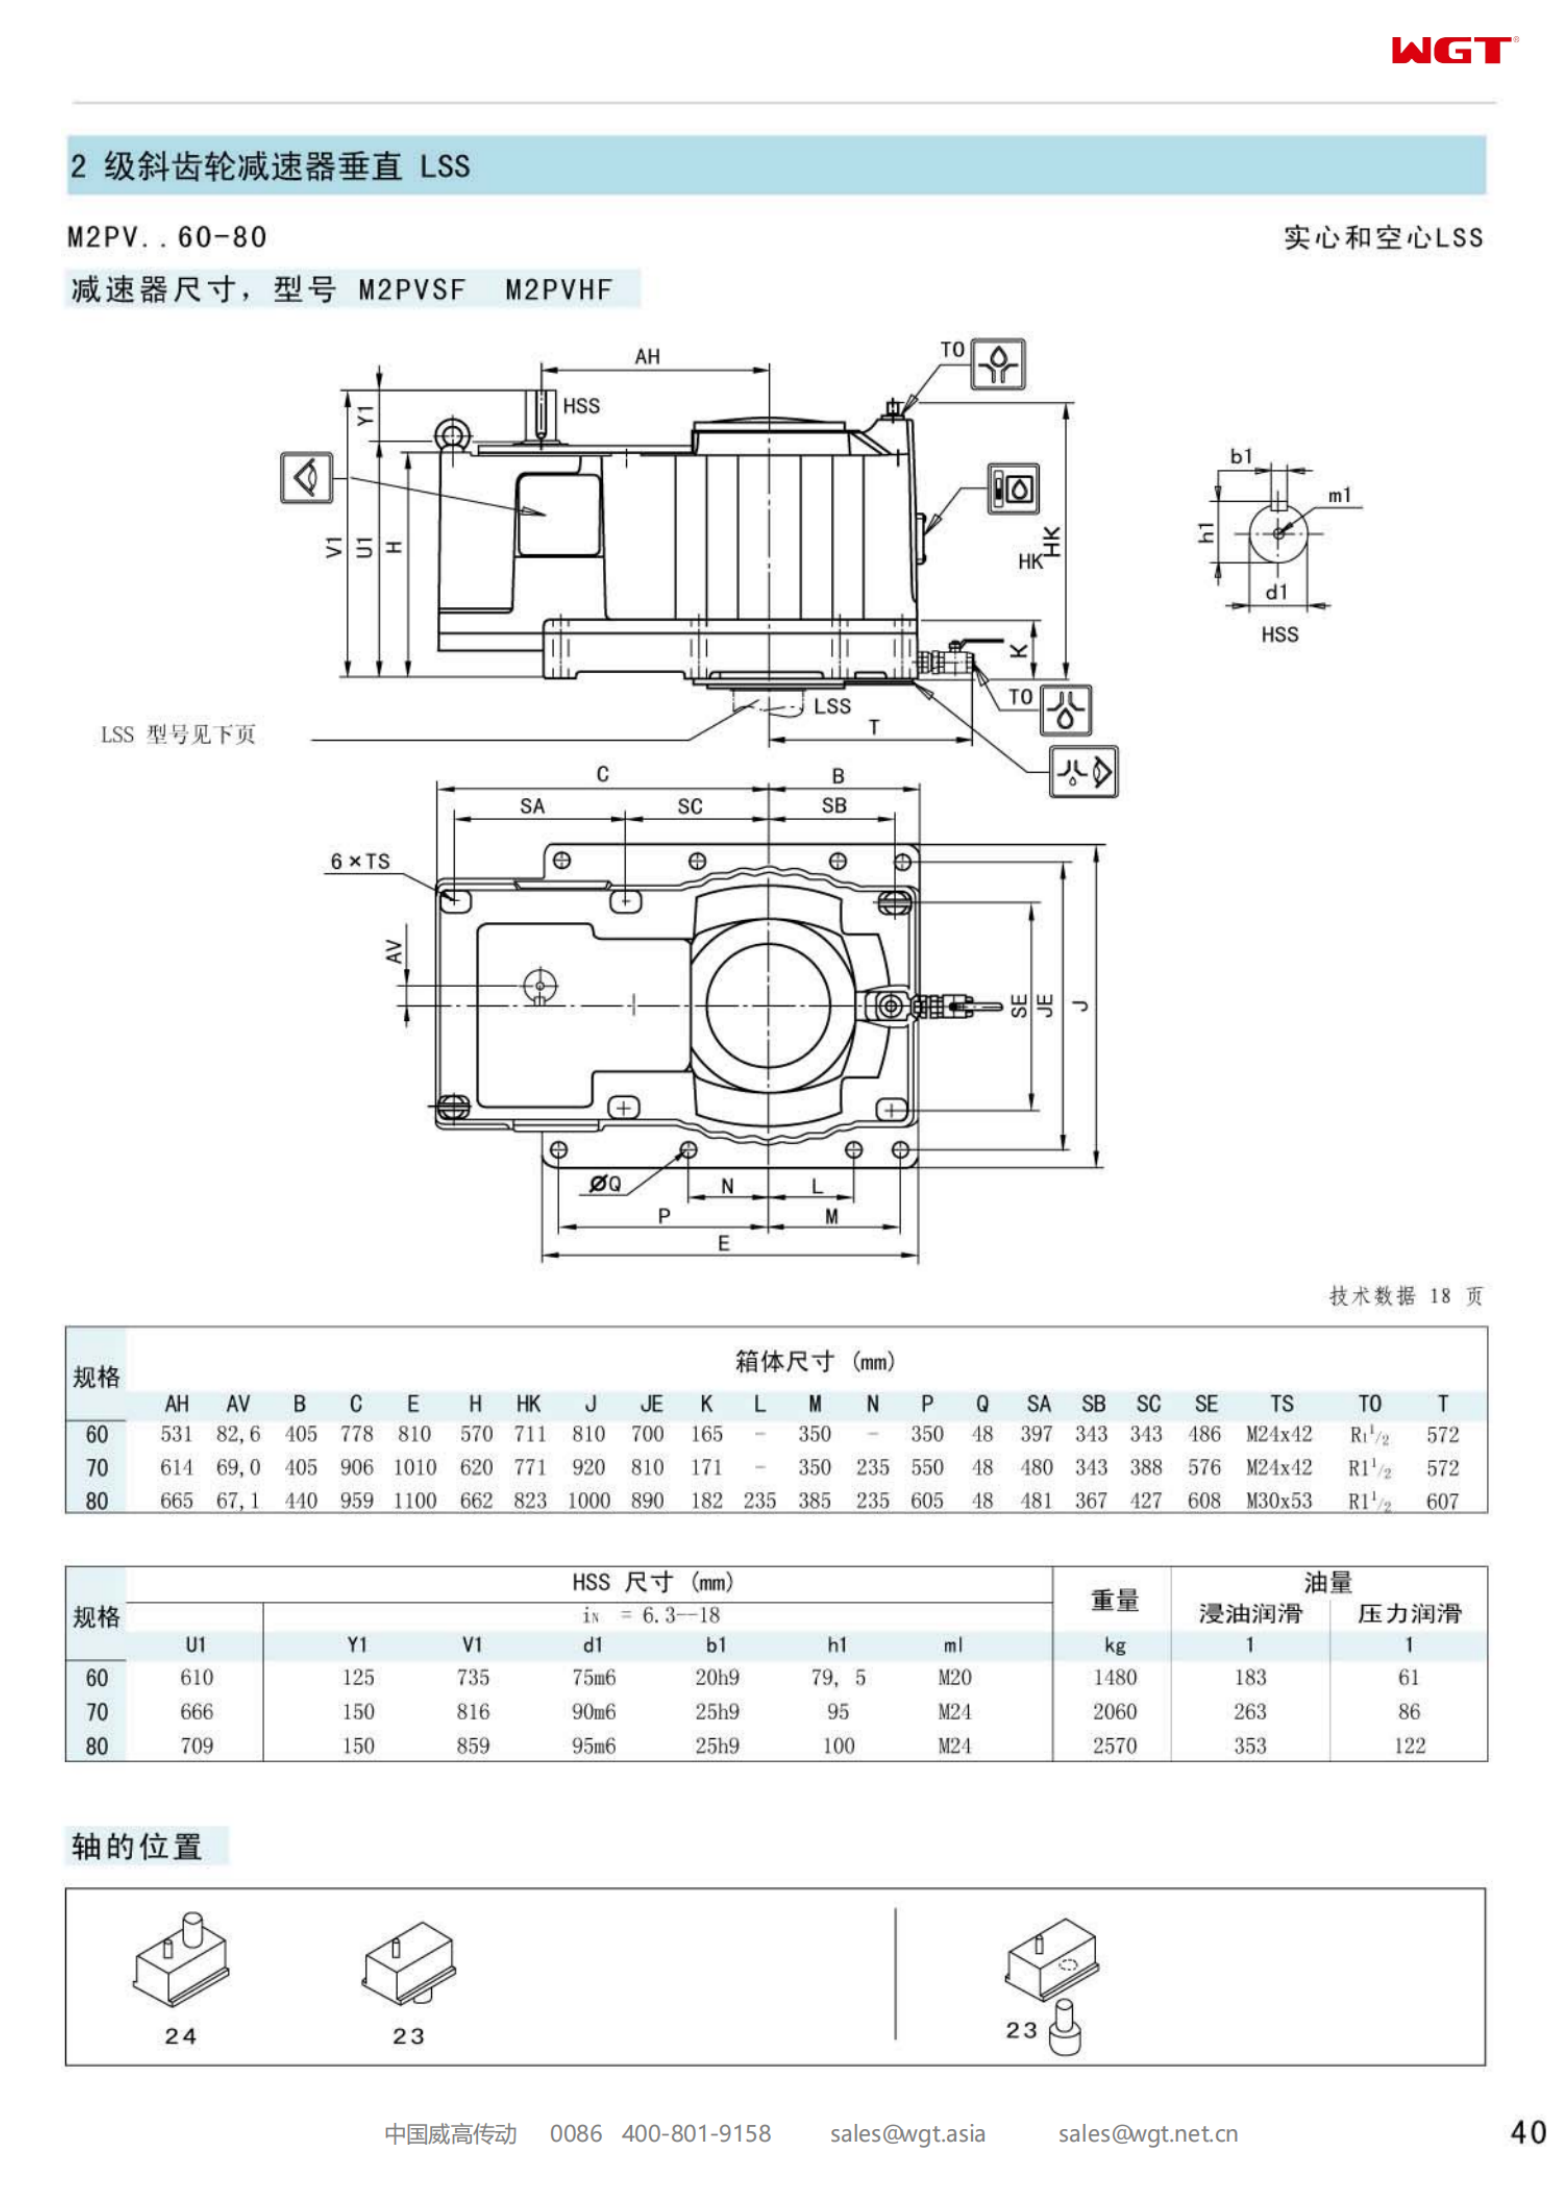 M2PVSF70 Replace_SEW_M_Series Gearbox